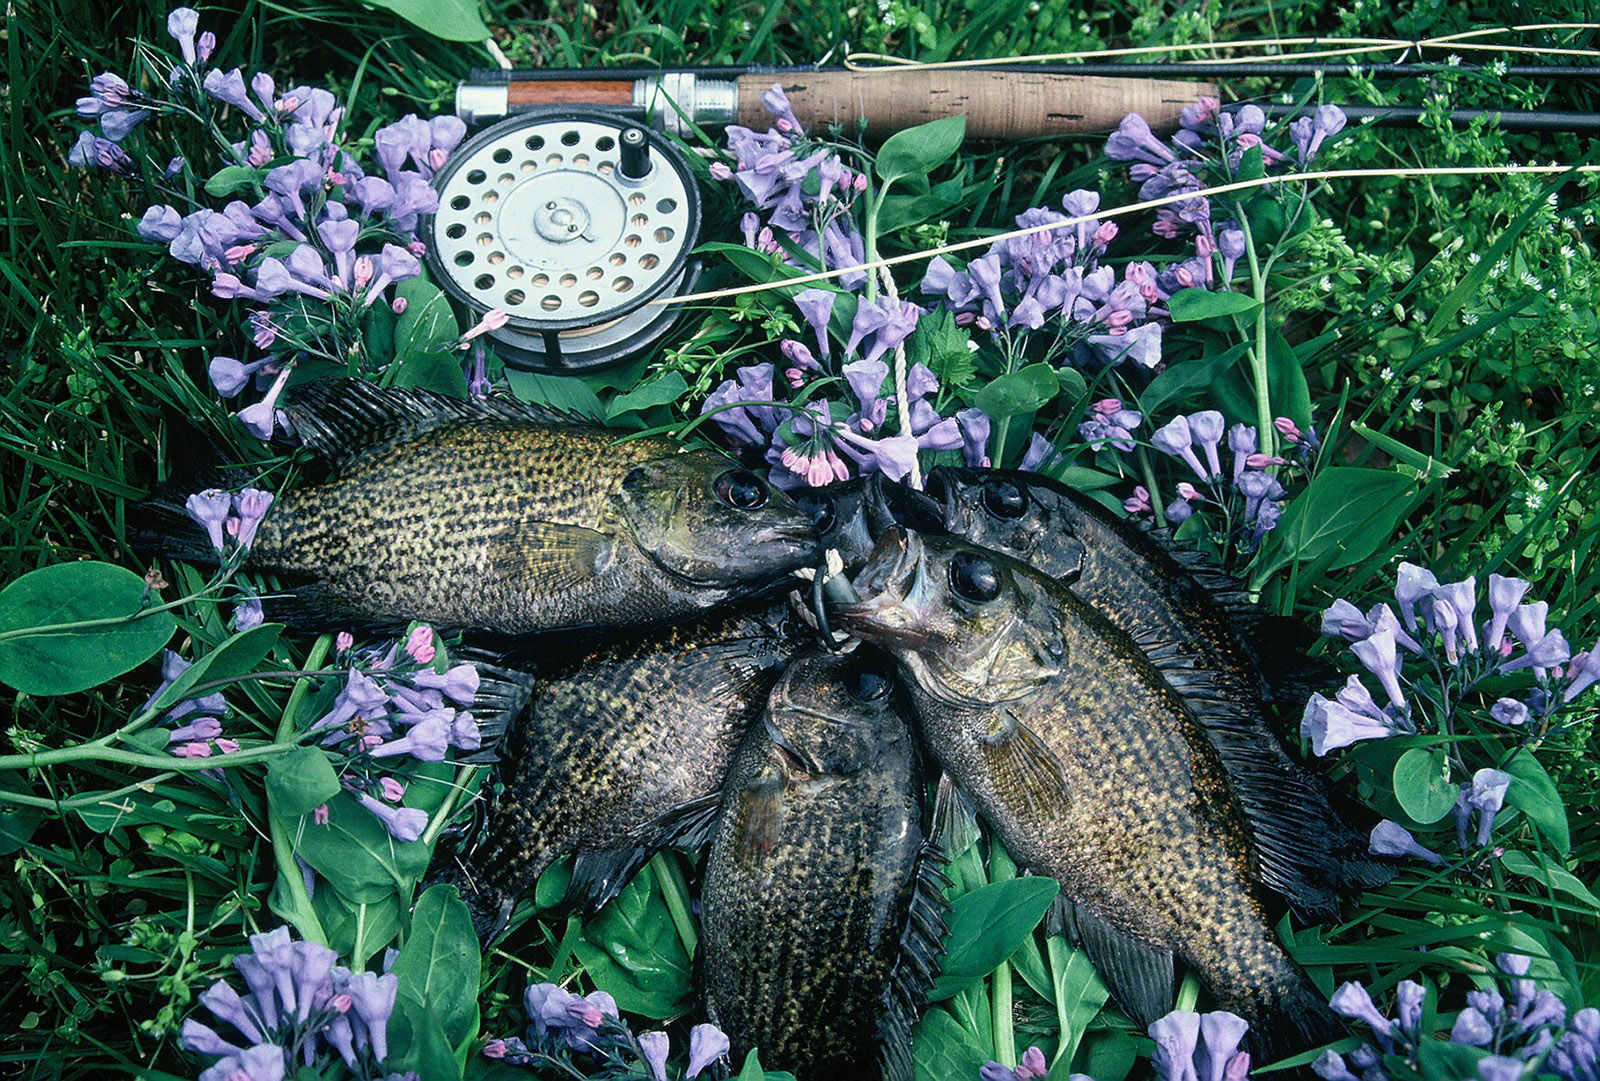 An image of several rock bass on flowers next to a fishing rod